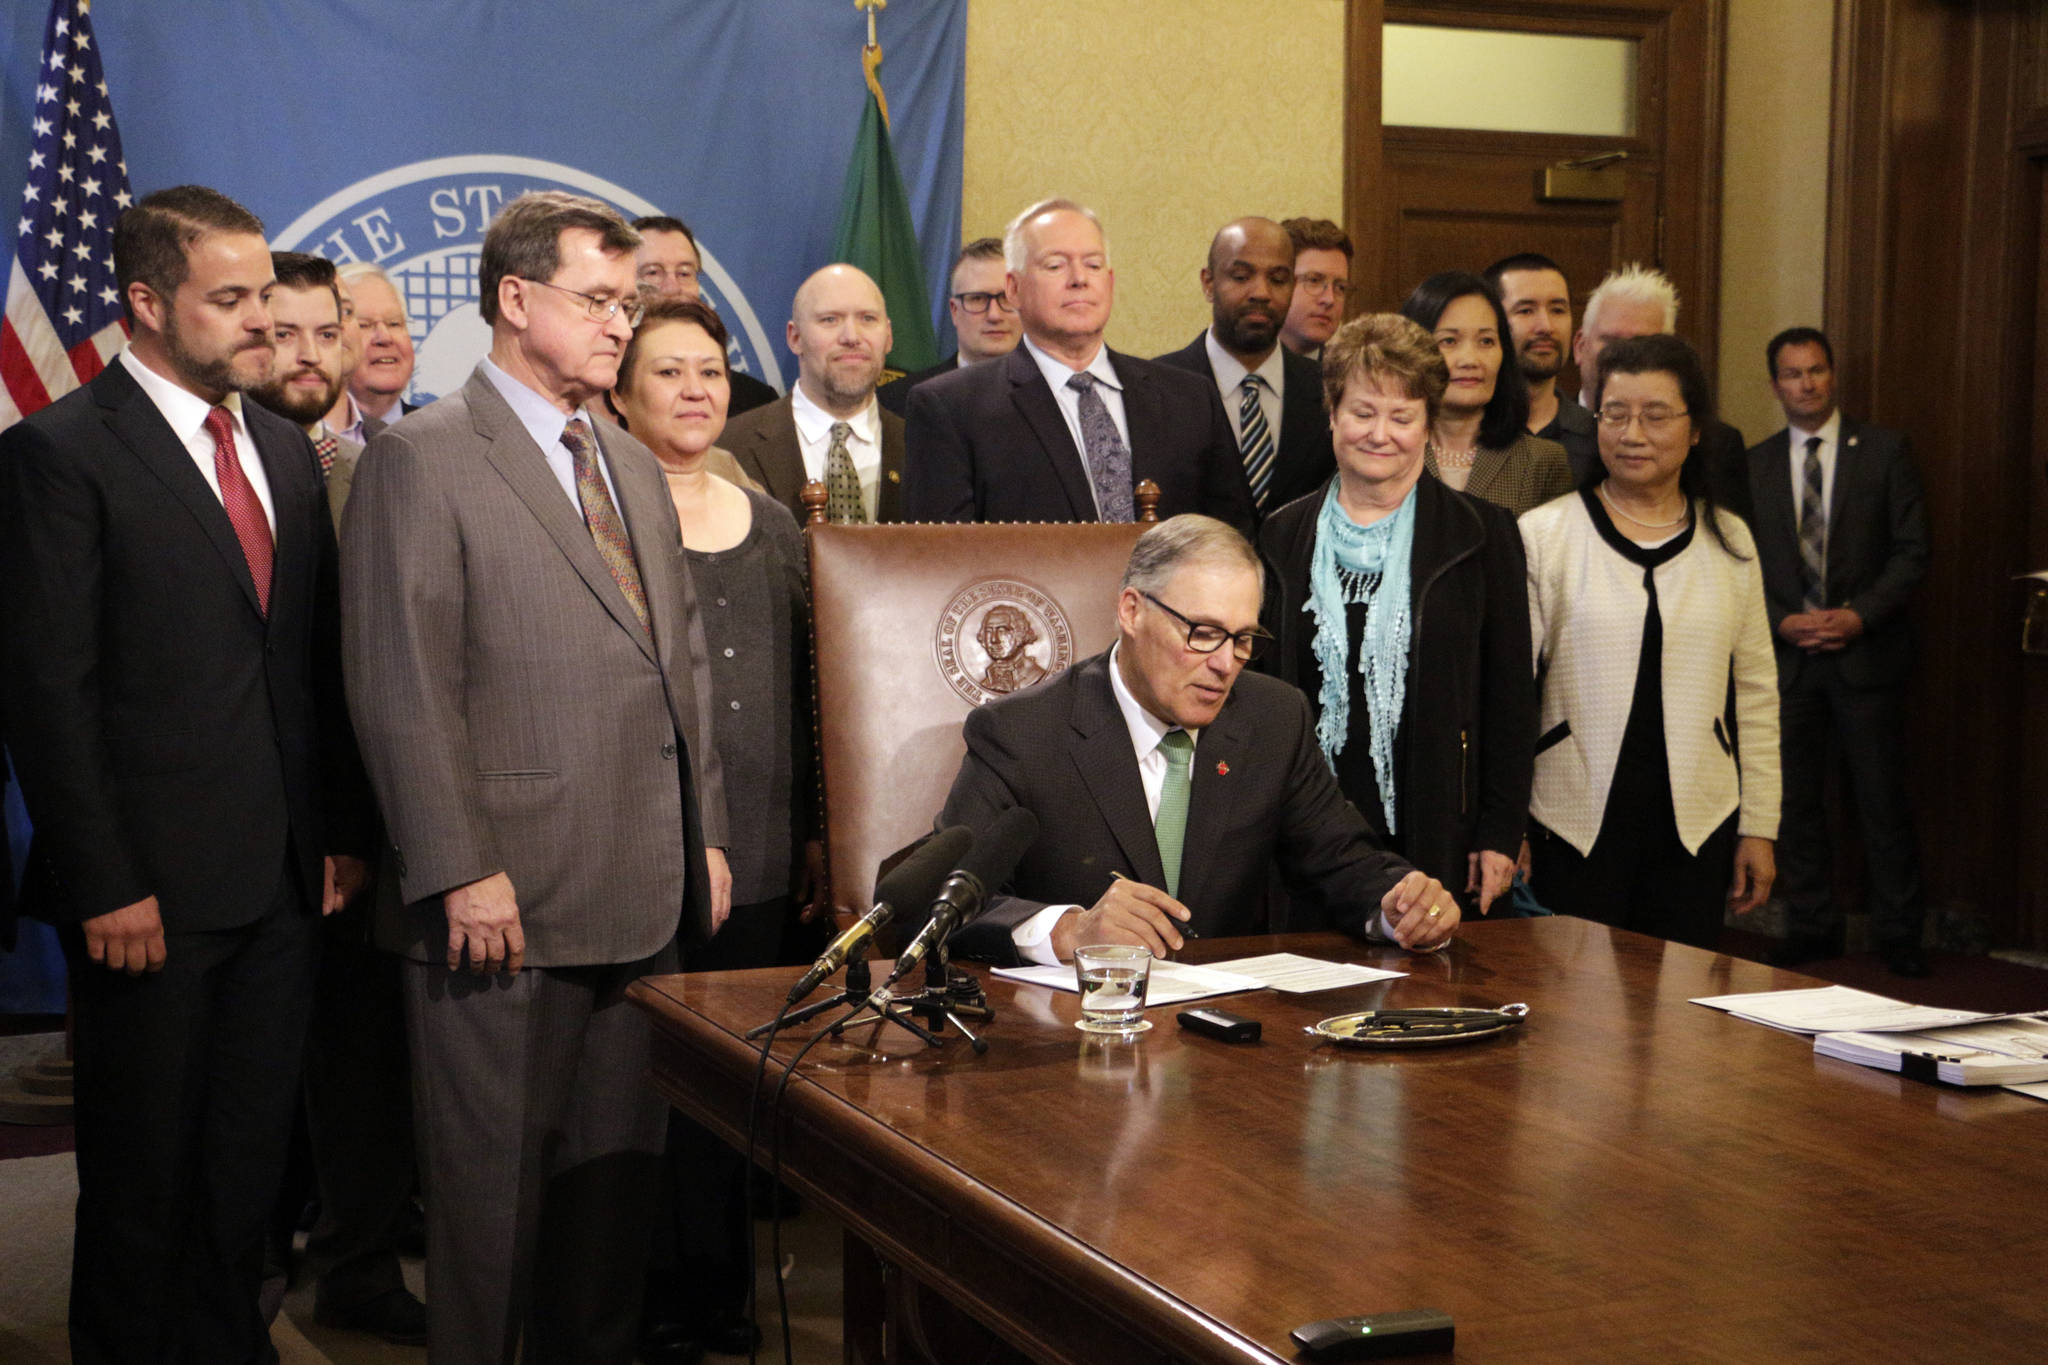 Gov. Jay Inslee, seated, prepares to sign a bill Tuesday in Olympia that seeks to bring Washington state into compliance with the federal REAL ID Act. (Rachel La Corte/The Associated Press)